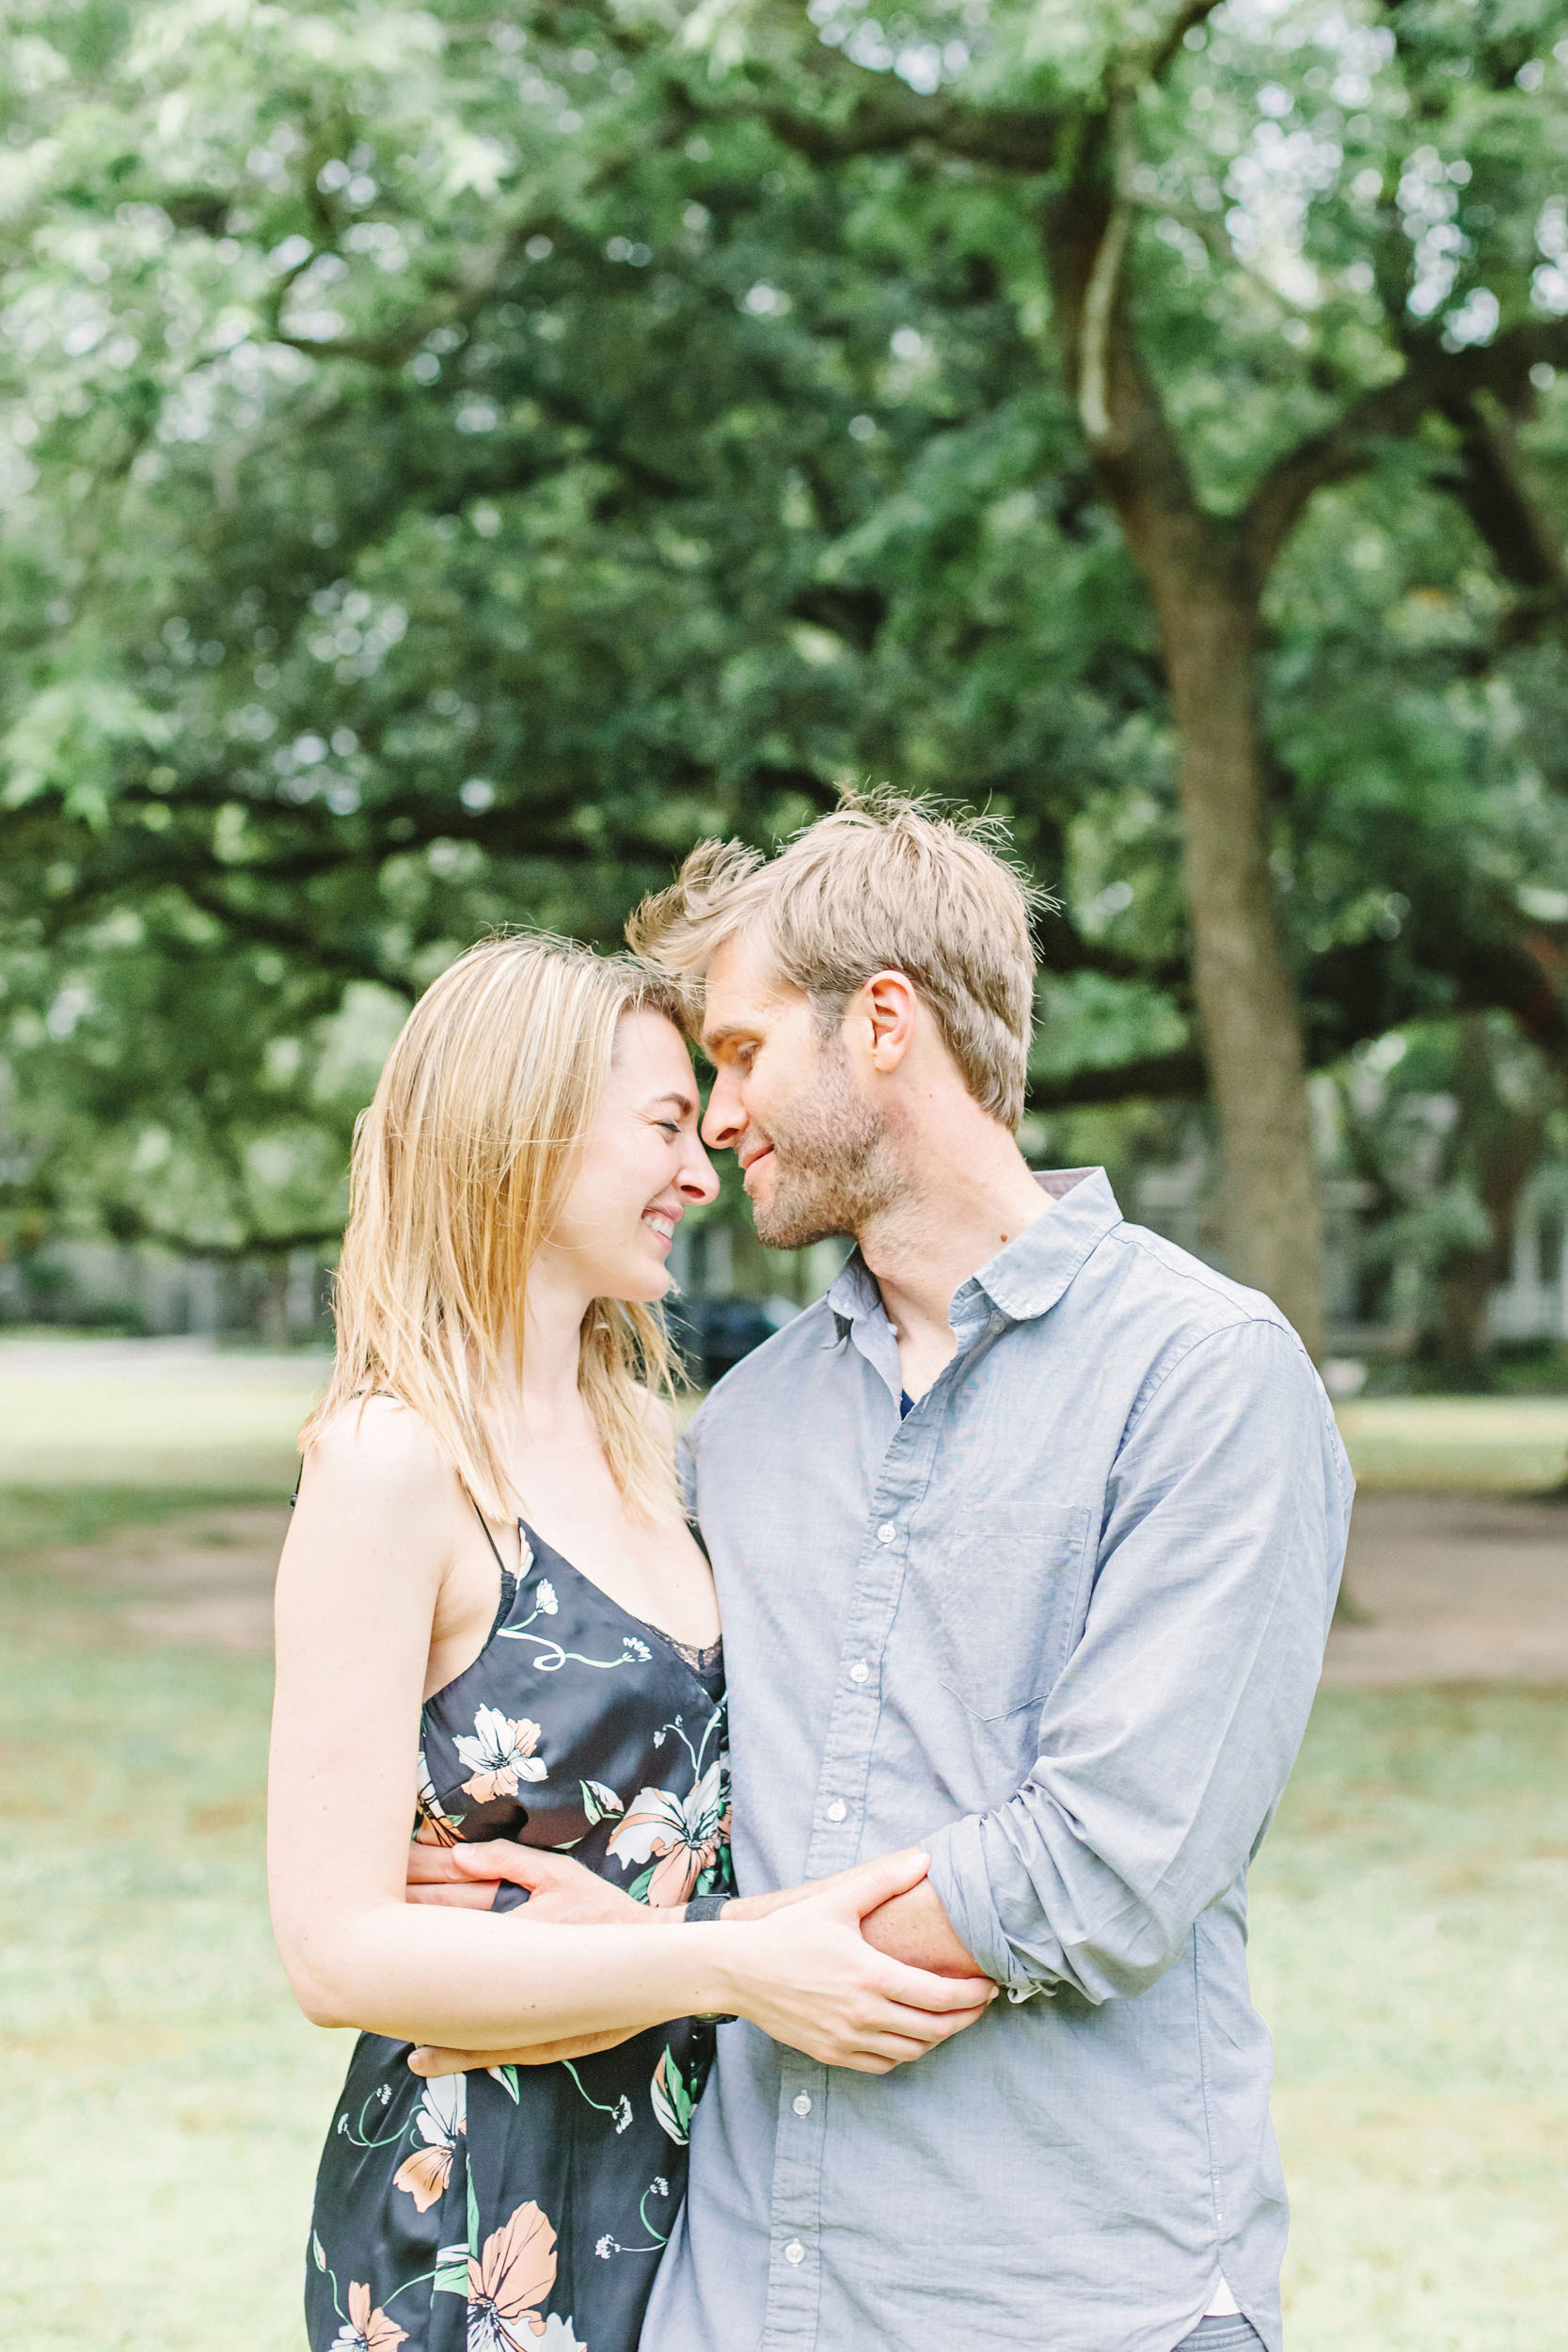 Cassie Schott Photography_Houston and Chicago Portrait Photographer_Engagement Sessions and Anniversary Sessions_300.jpg